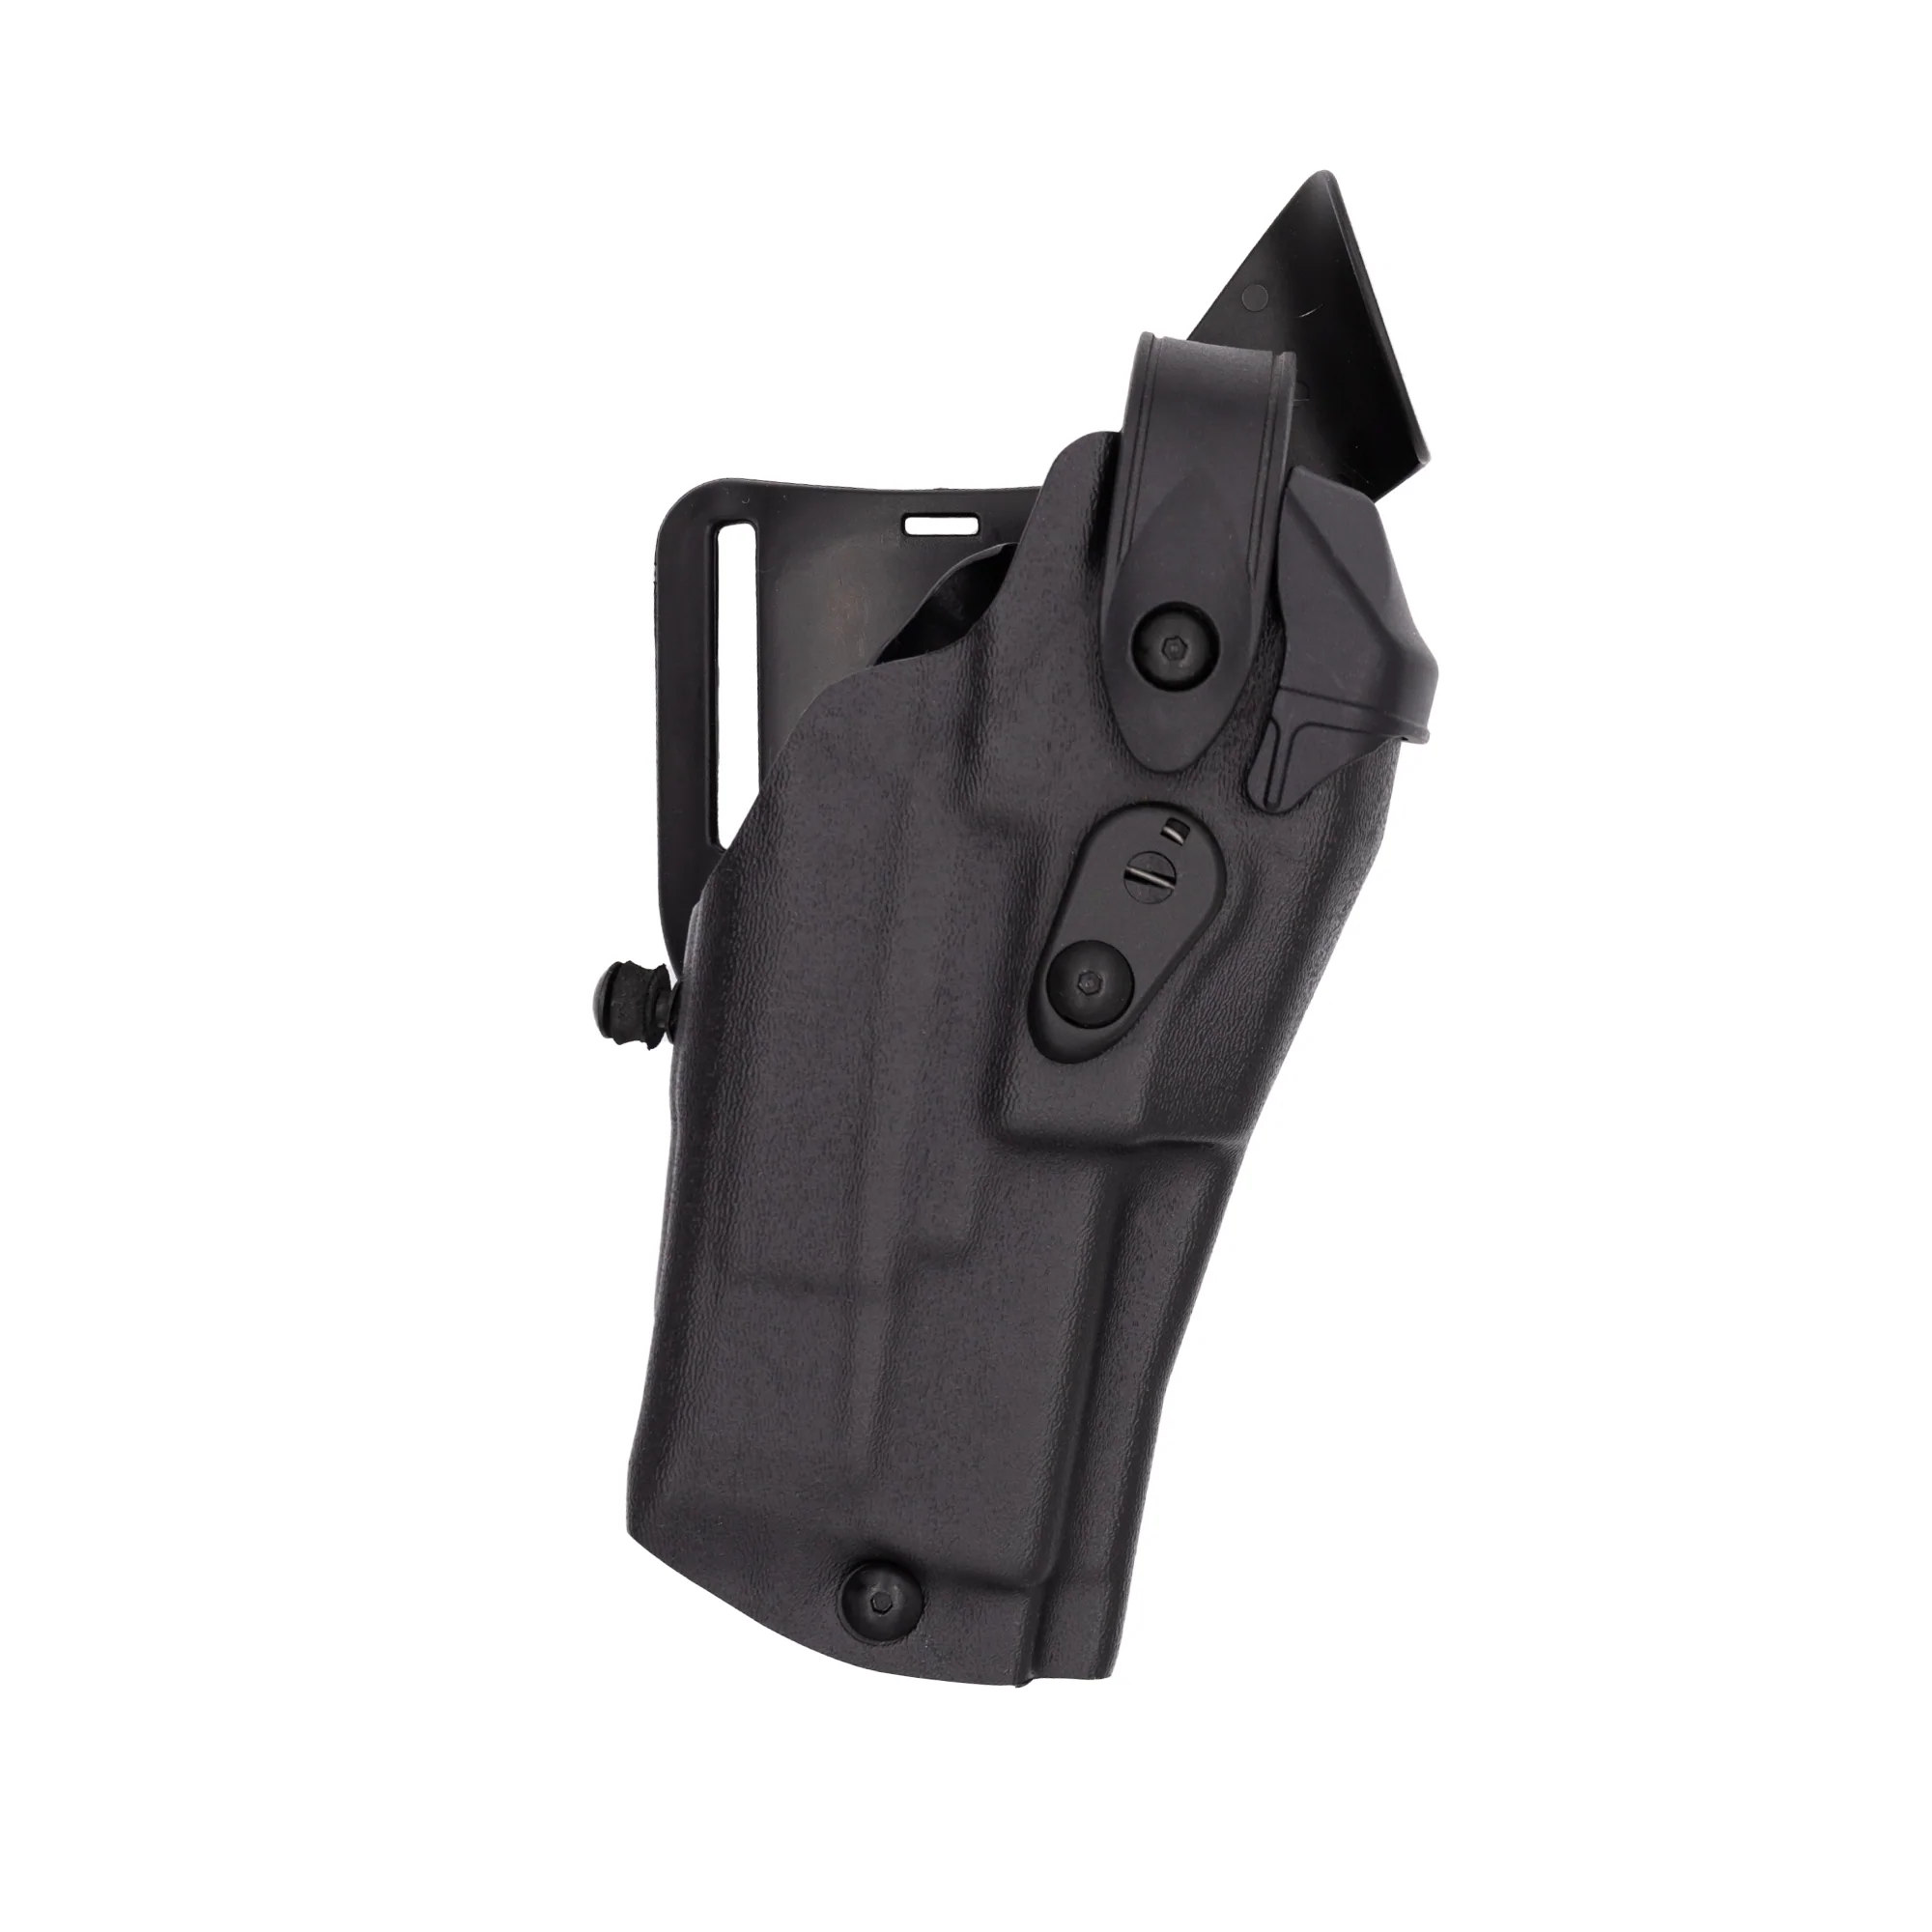 Model 6360rds Als/sls Mid-ride, Level Iii Retention Duty Holster For Sig Sauer P320 9c W/ Light - KR6360RDS-7502-482